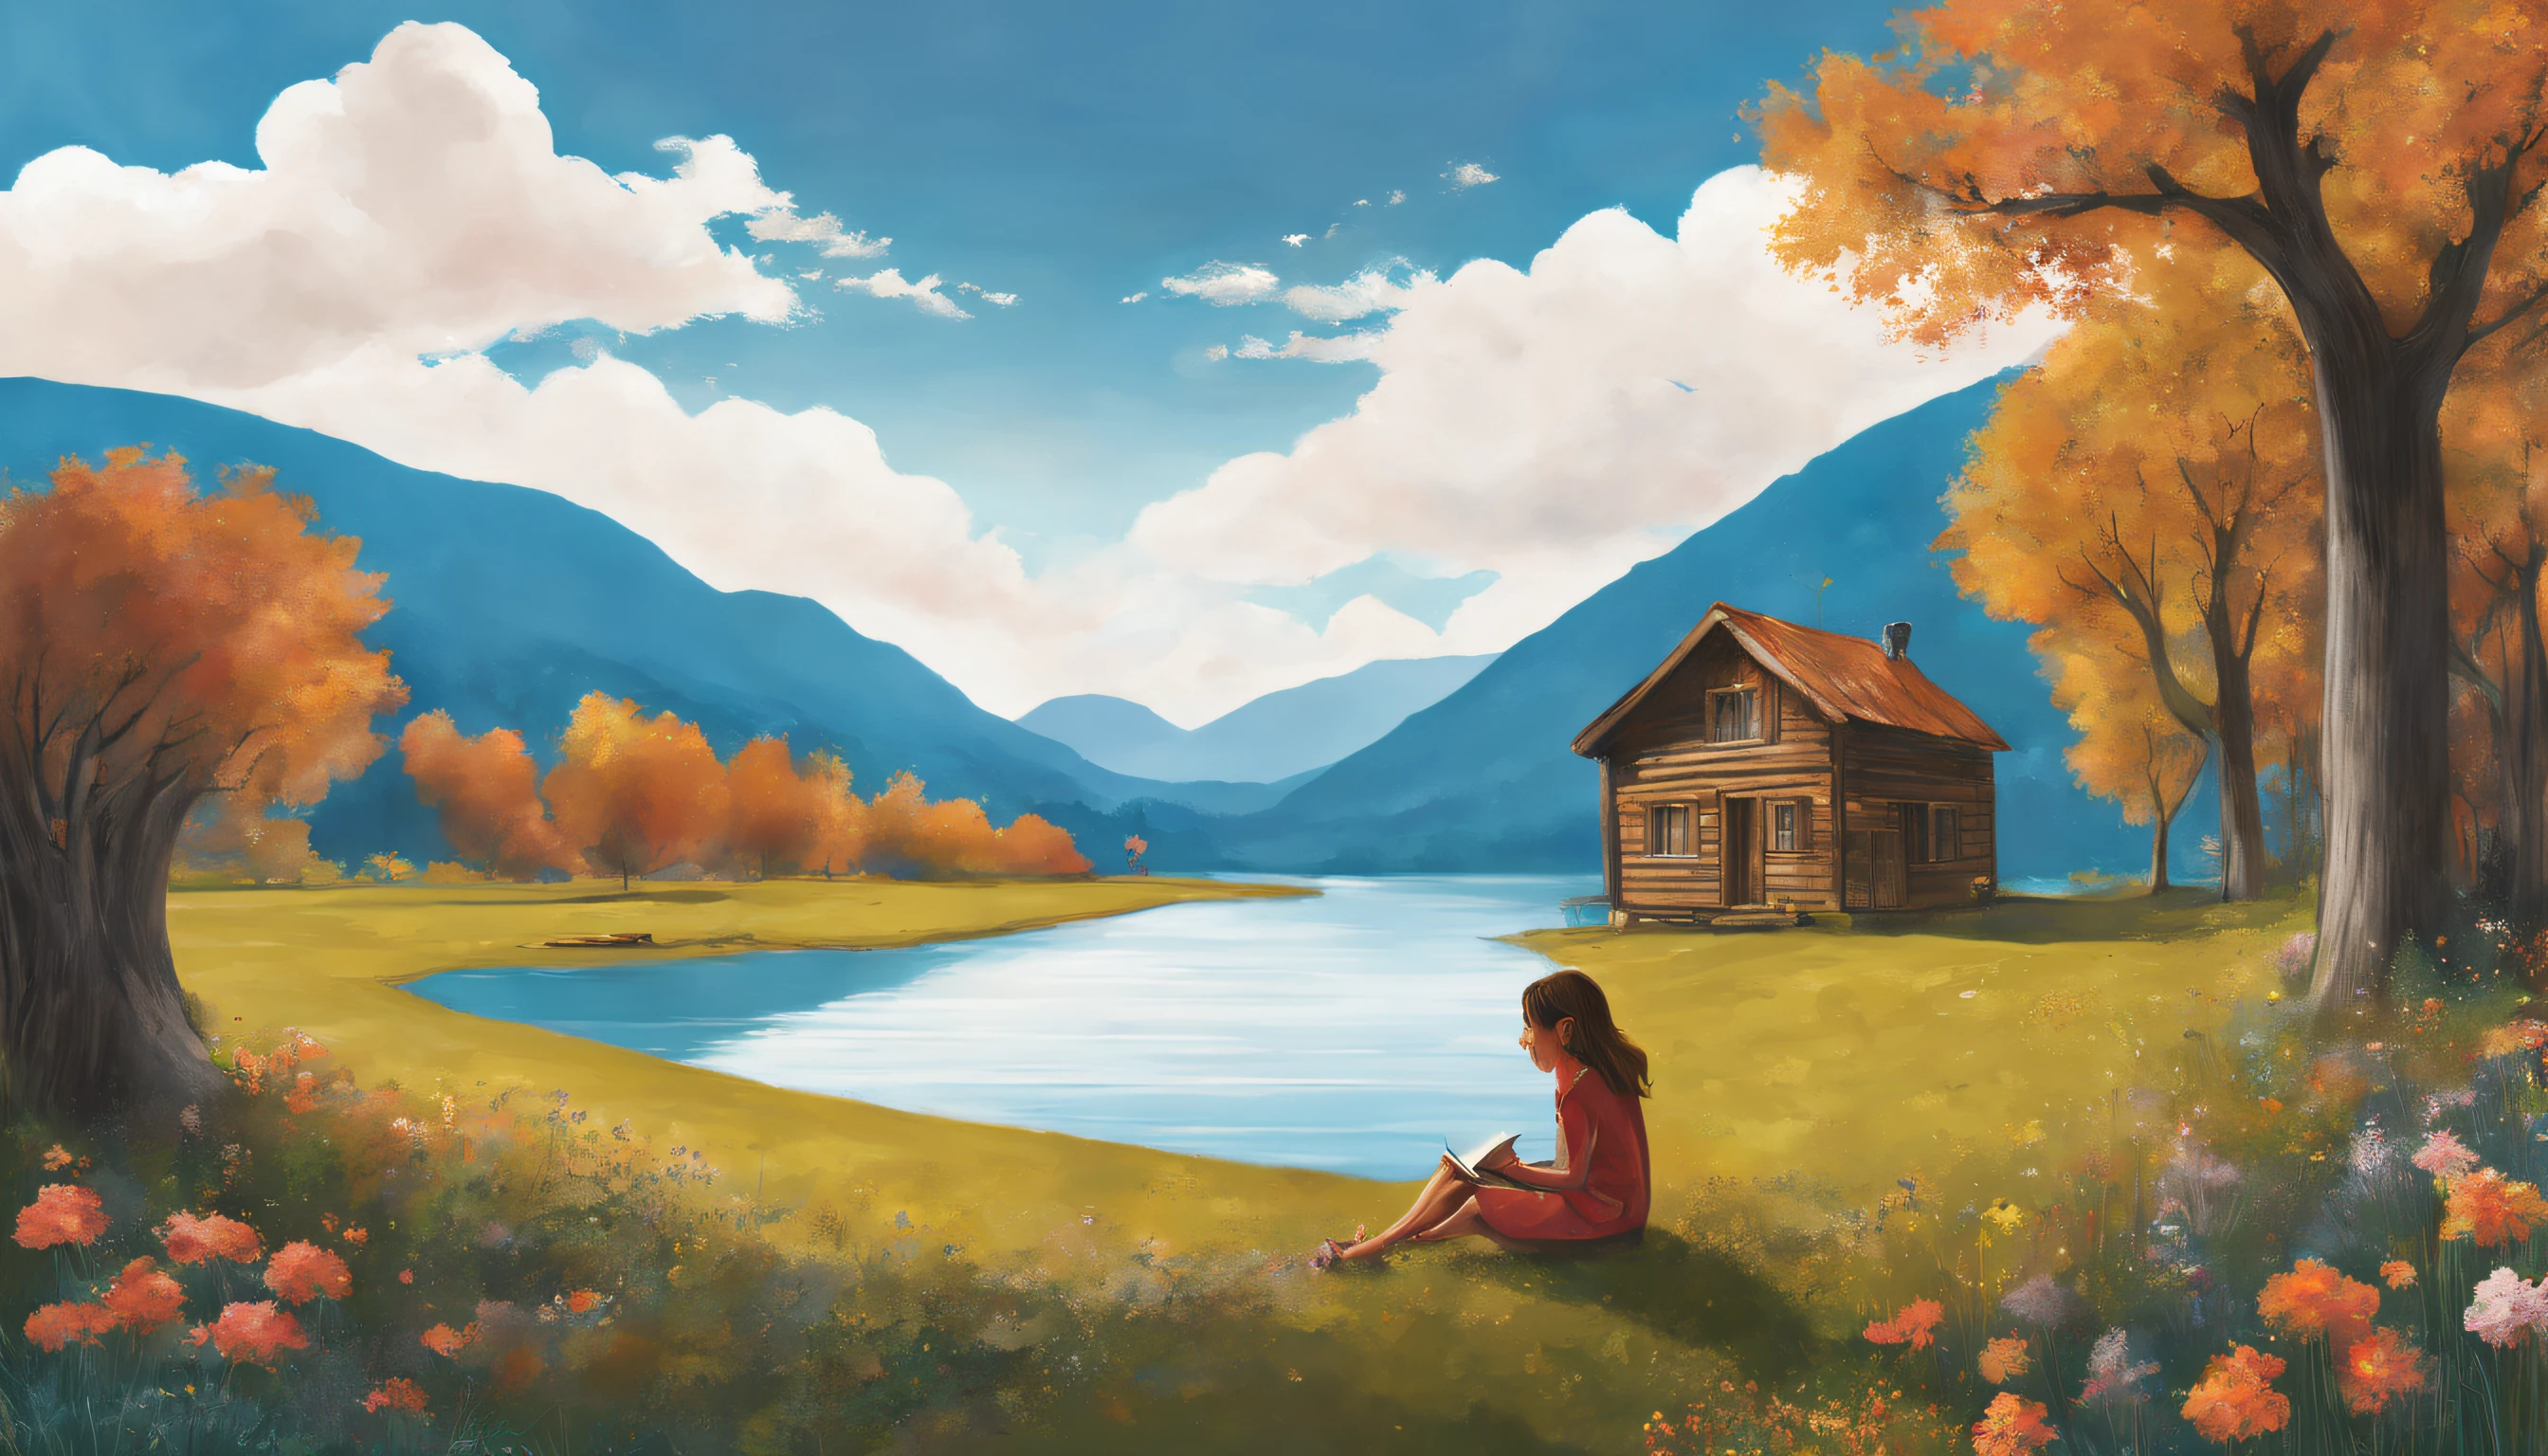 autumnal， grassy fields， Some small flowers， Clear lake water，There is a small cabin next to the lake，A young girl reads a book leisurely，Listen to the music，a paradise， large clouds， blue-sky， high definition detail， hyper-detailing， cinematic ligh， ultra-realistic realism， the soft light，Deep field focus bokeh， The scenery in the distance is a gentle mountain range， Ray traching， ultra-realistic realism. --v6